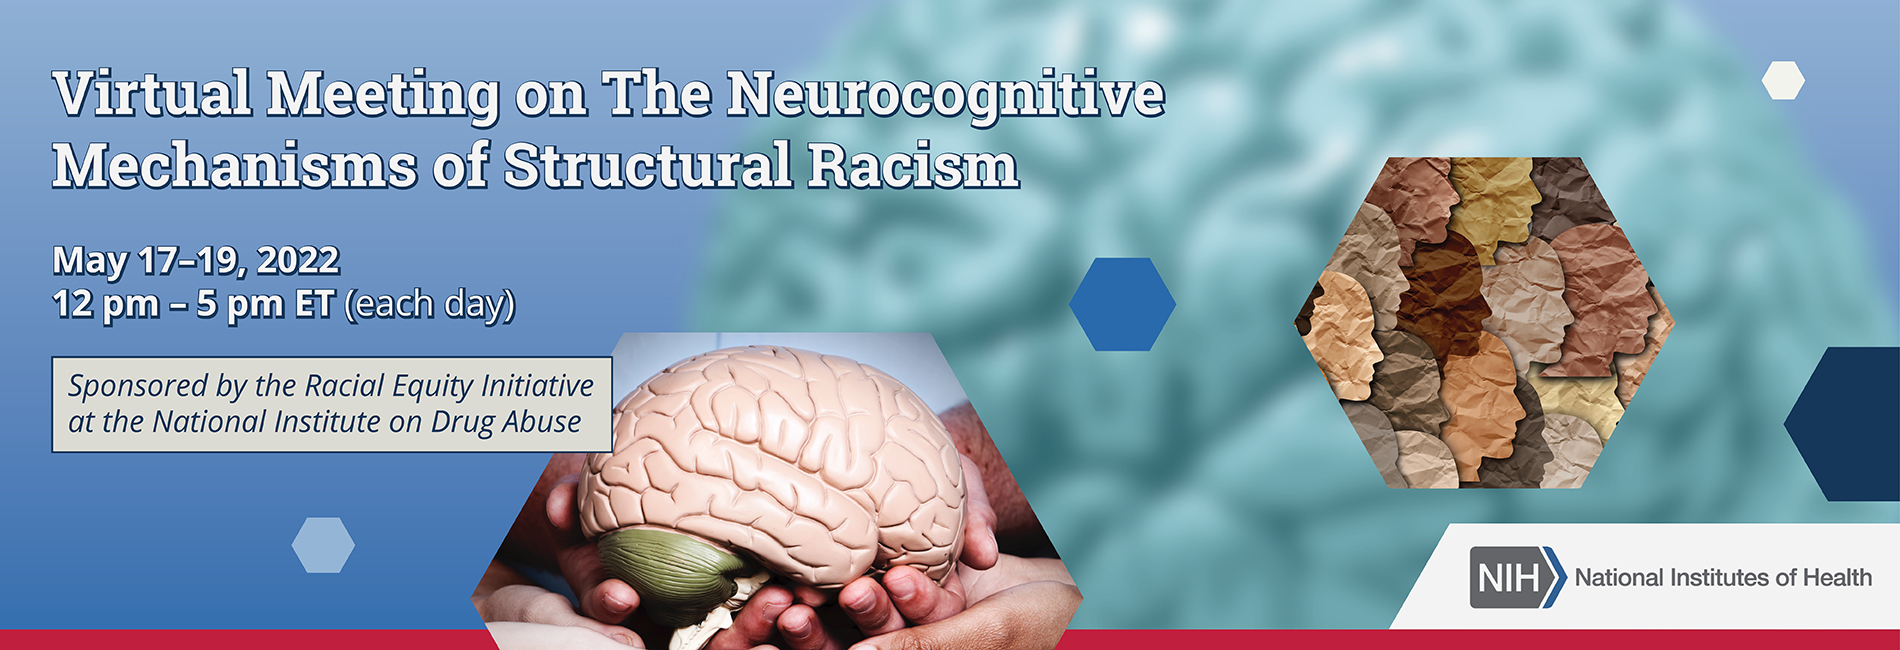 NIH - Neurocognitive Mechanisms of Structural Racism’ Virtual Meeting